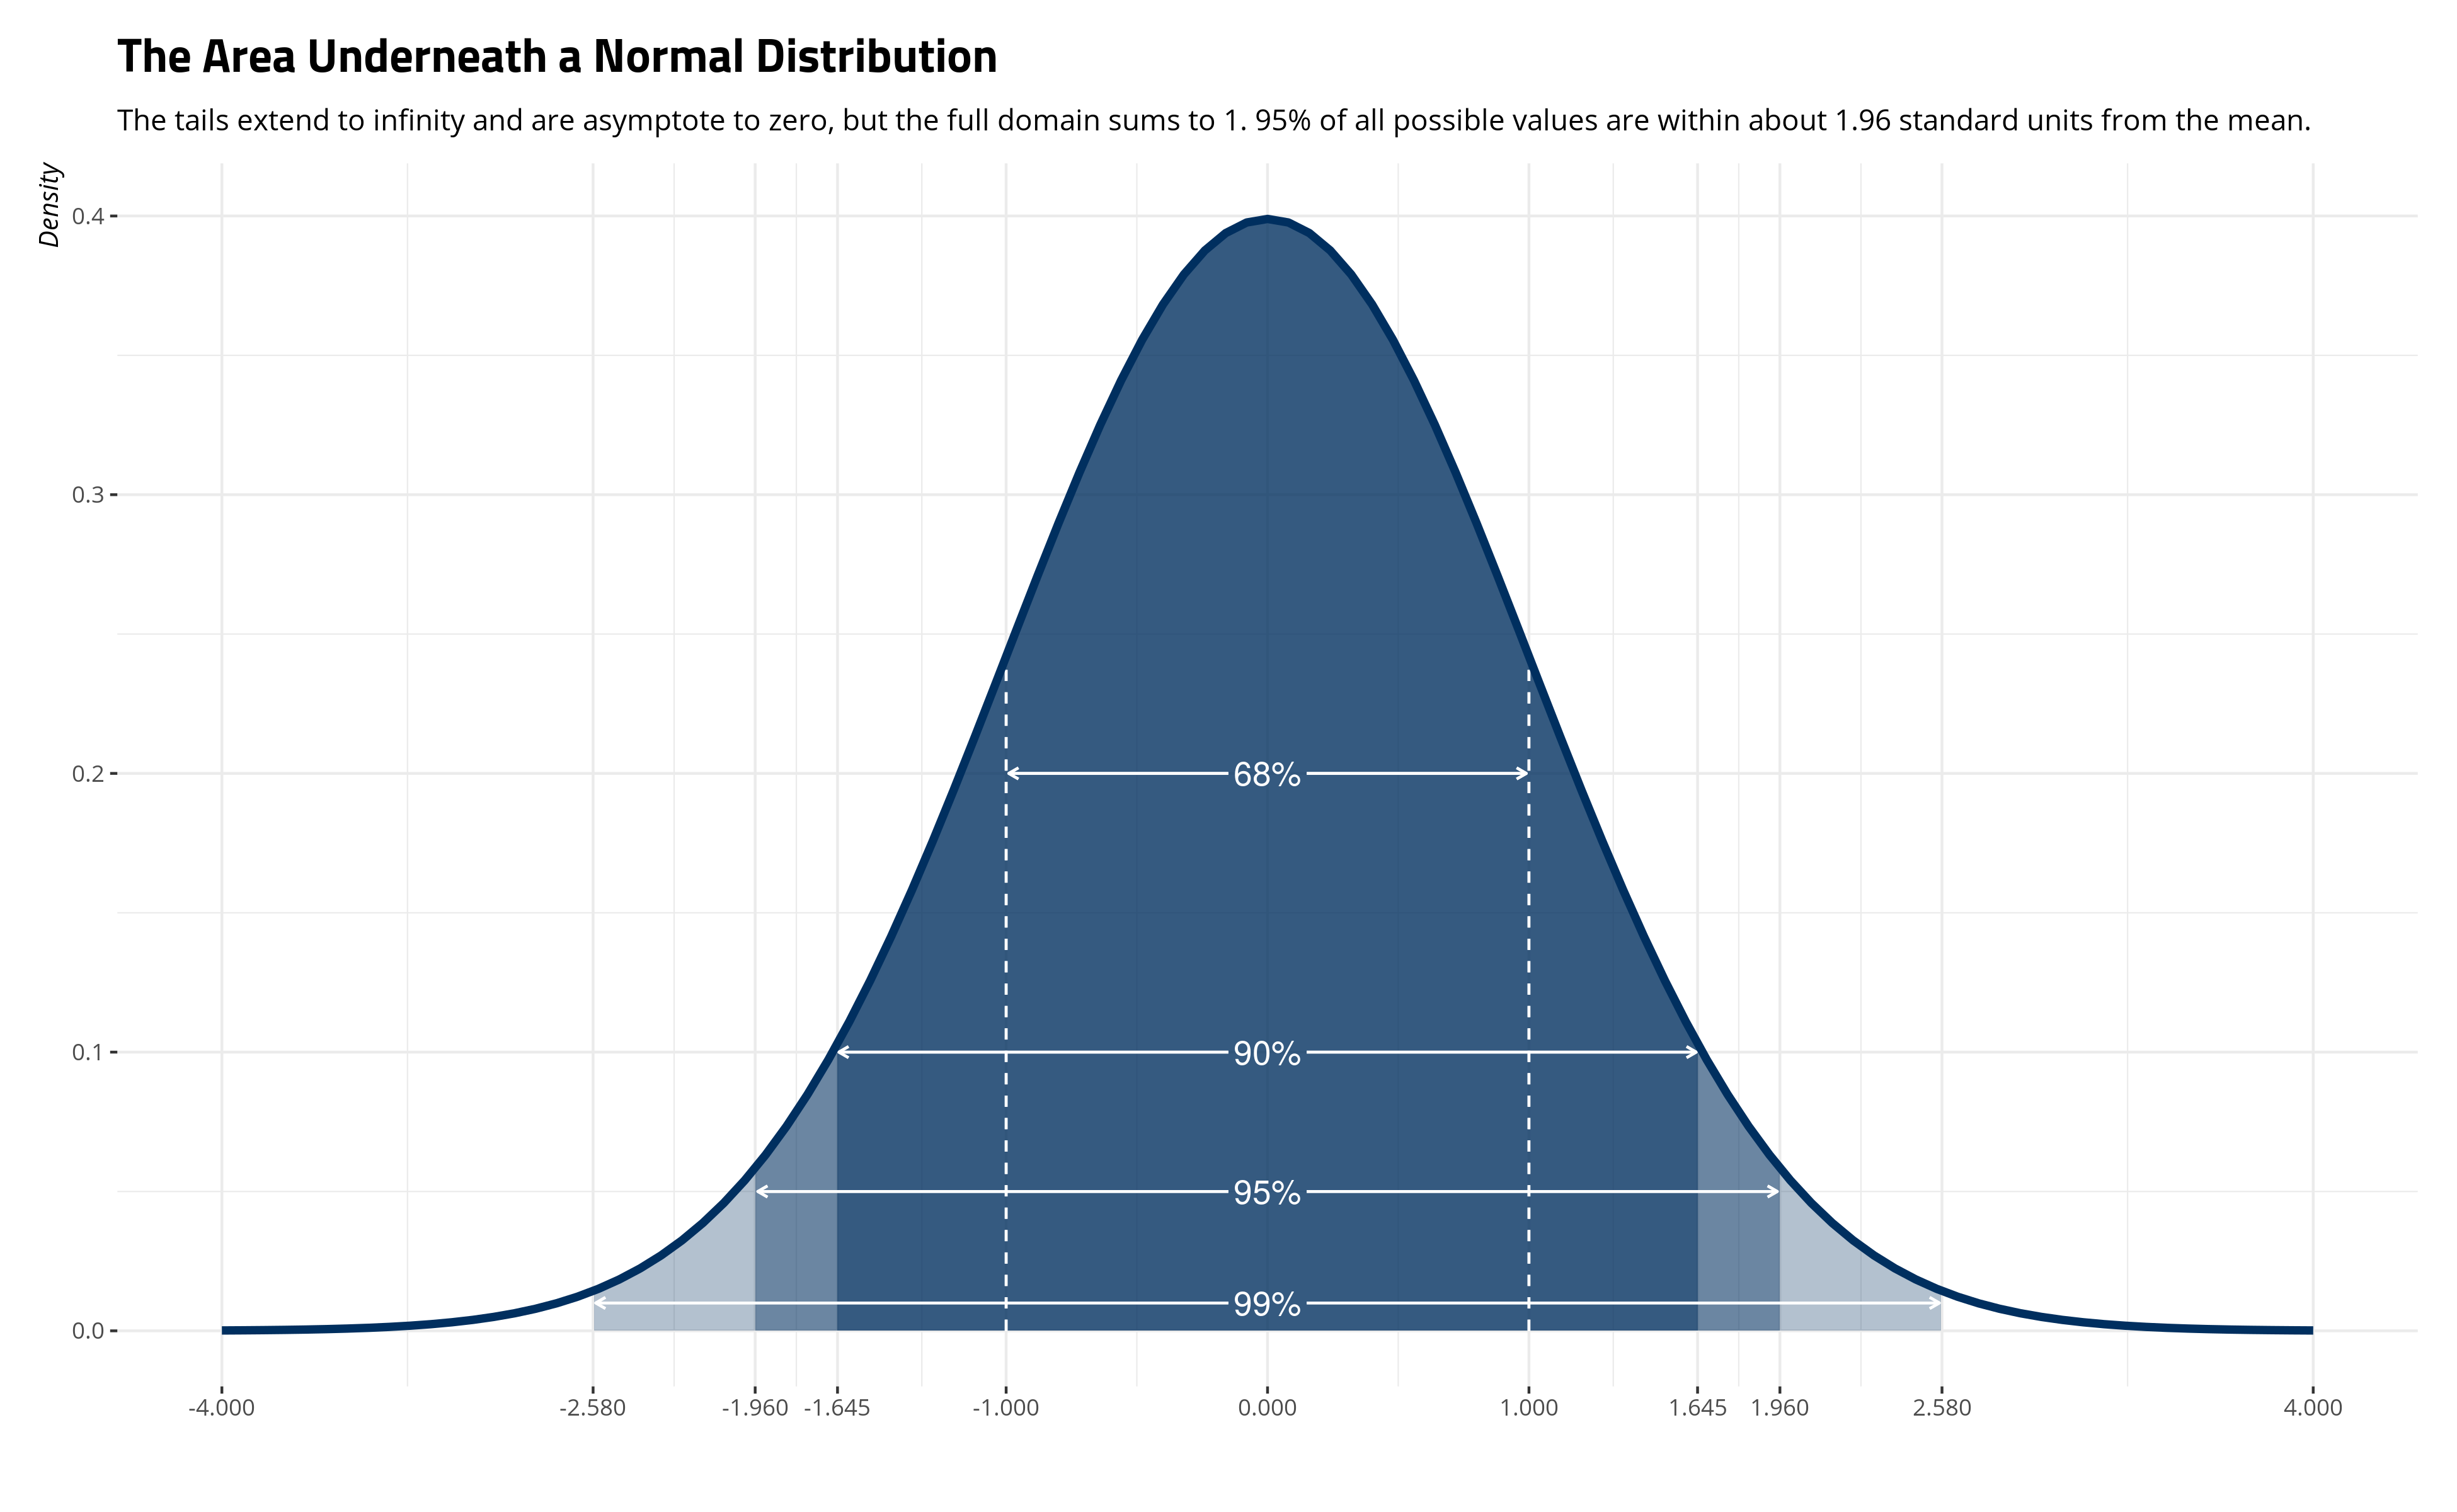 plot of chunk a-normal-distribution-with-areas-under-curve